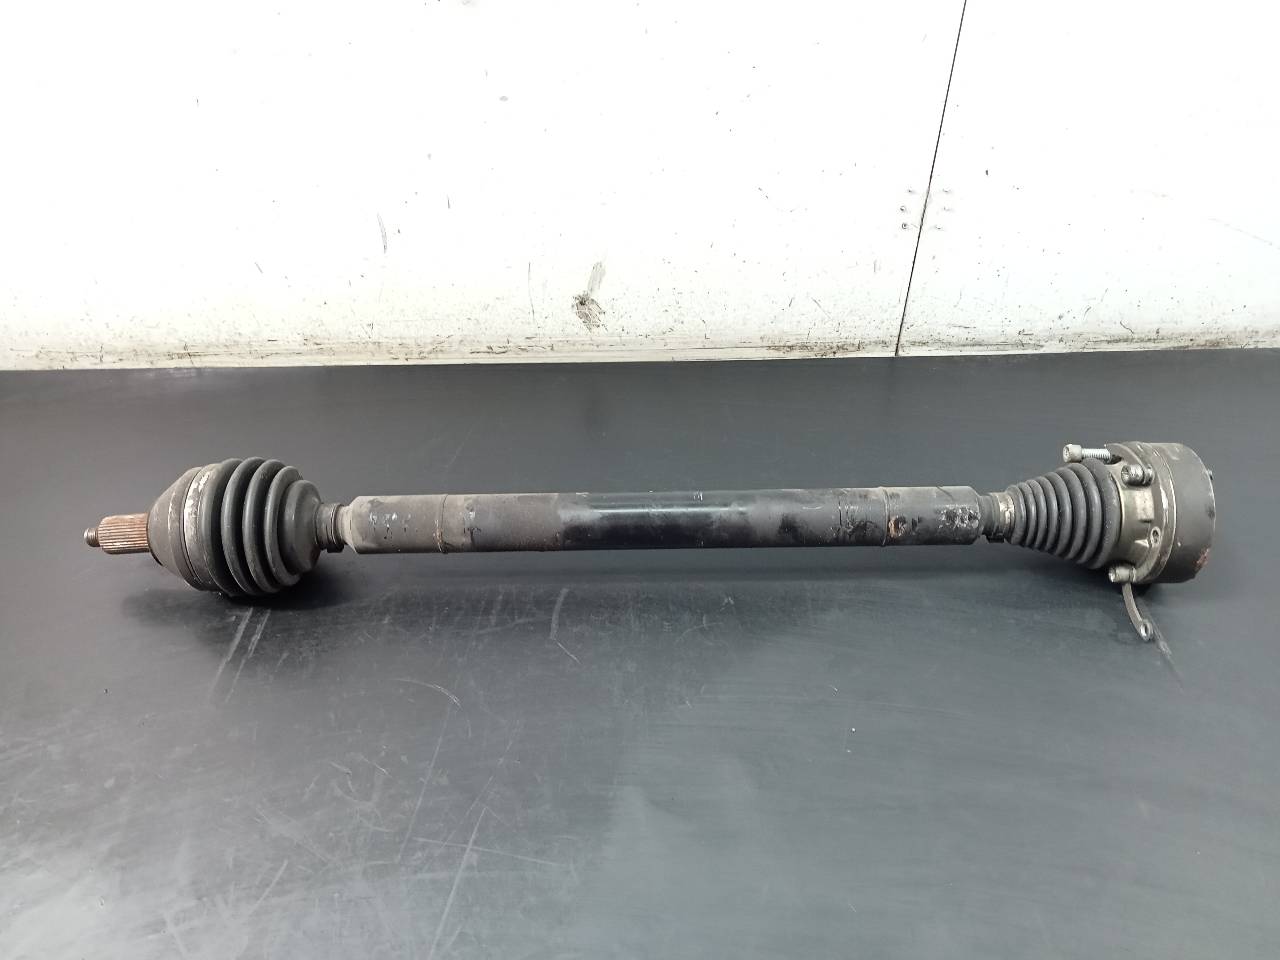 SEAT Toledo 4 generation (2012-2020) Front Right Driveshaft 6R0407762A, P1-A6-18 20959395